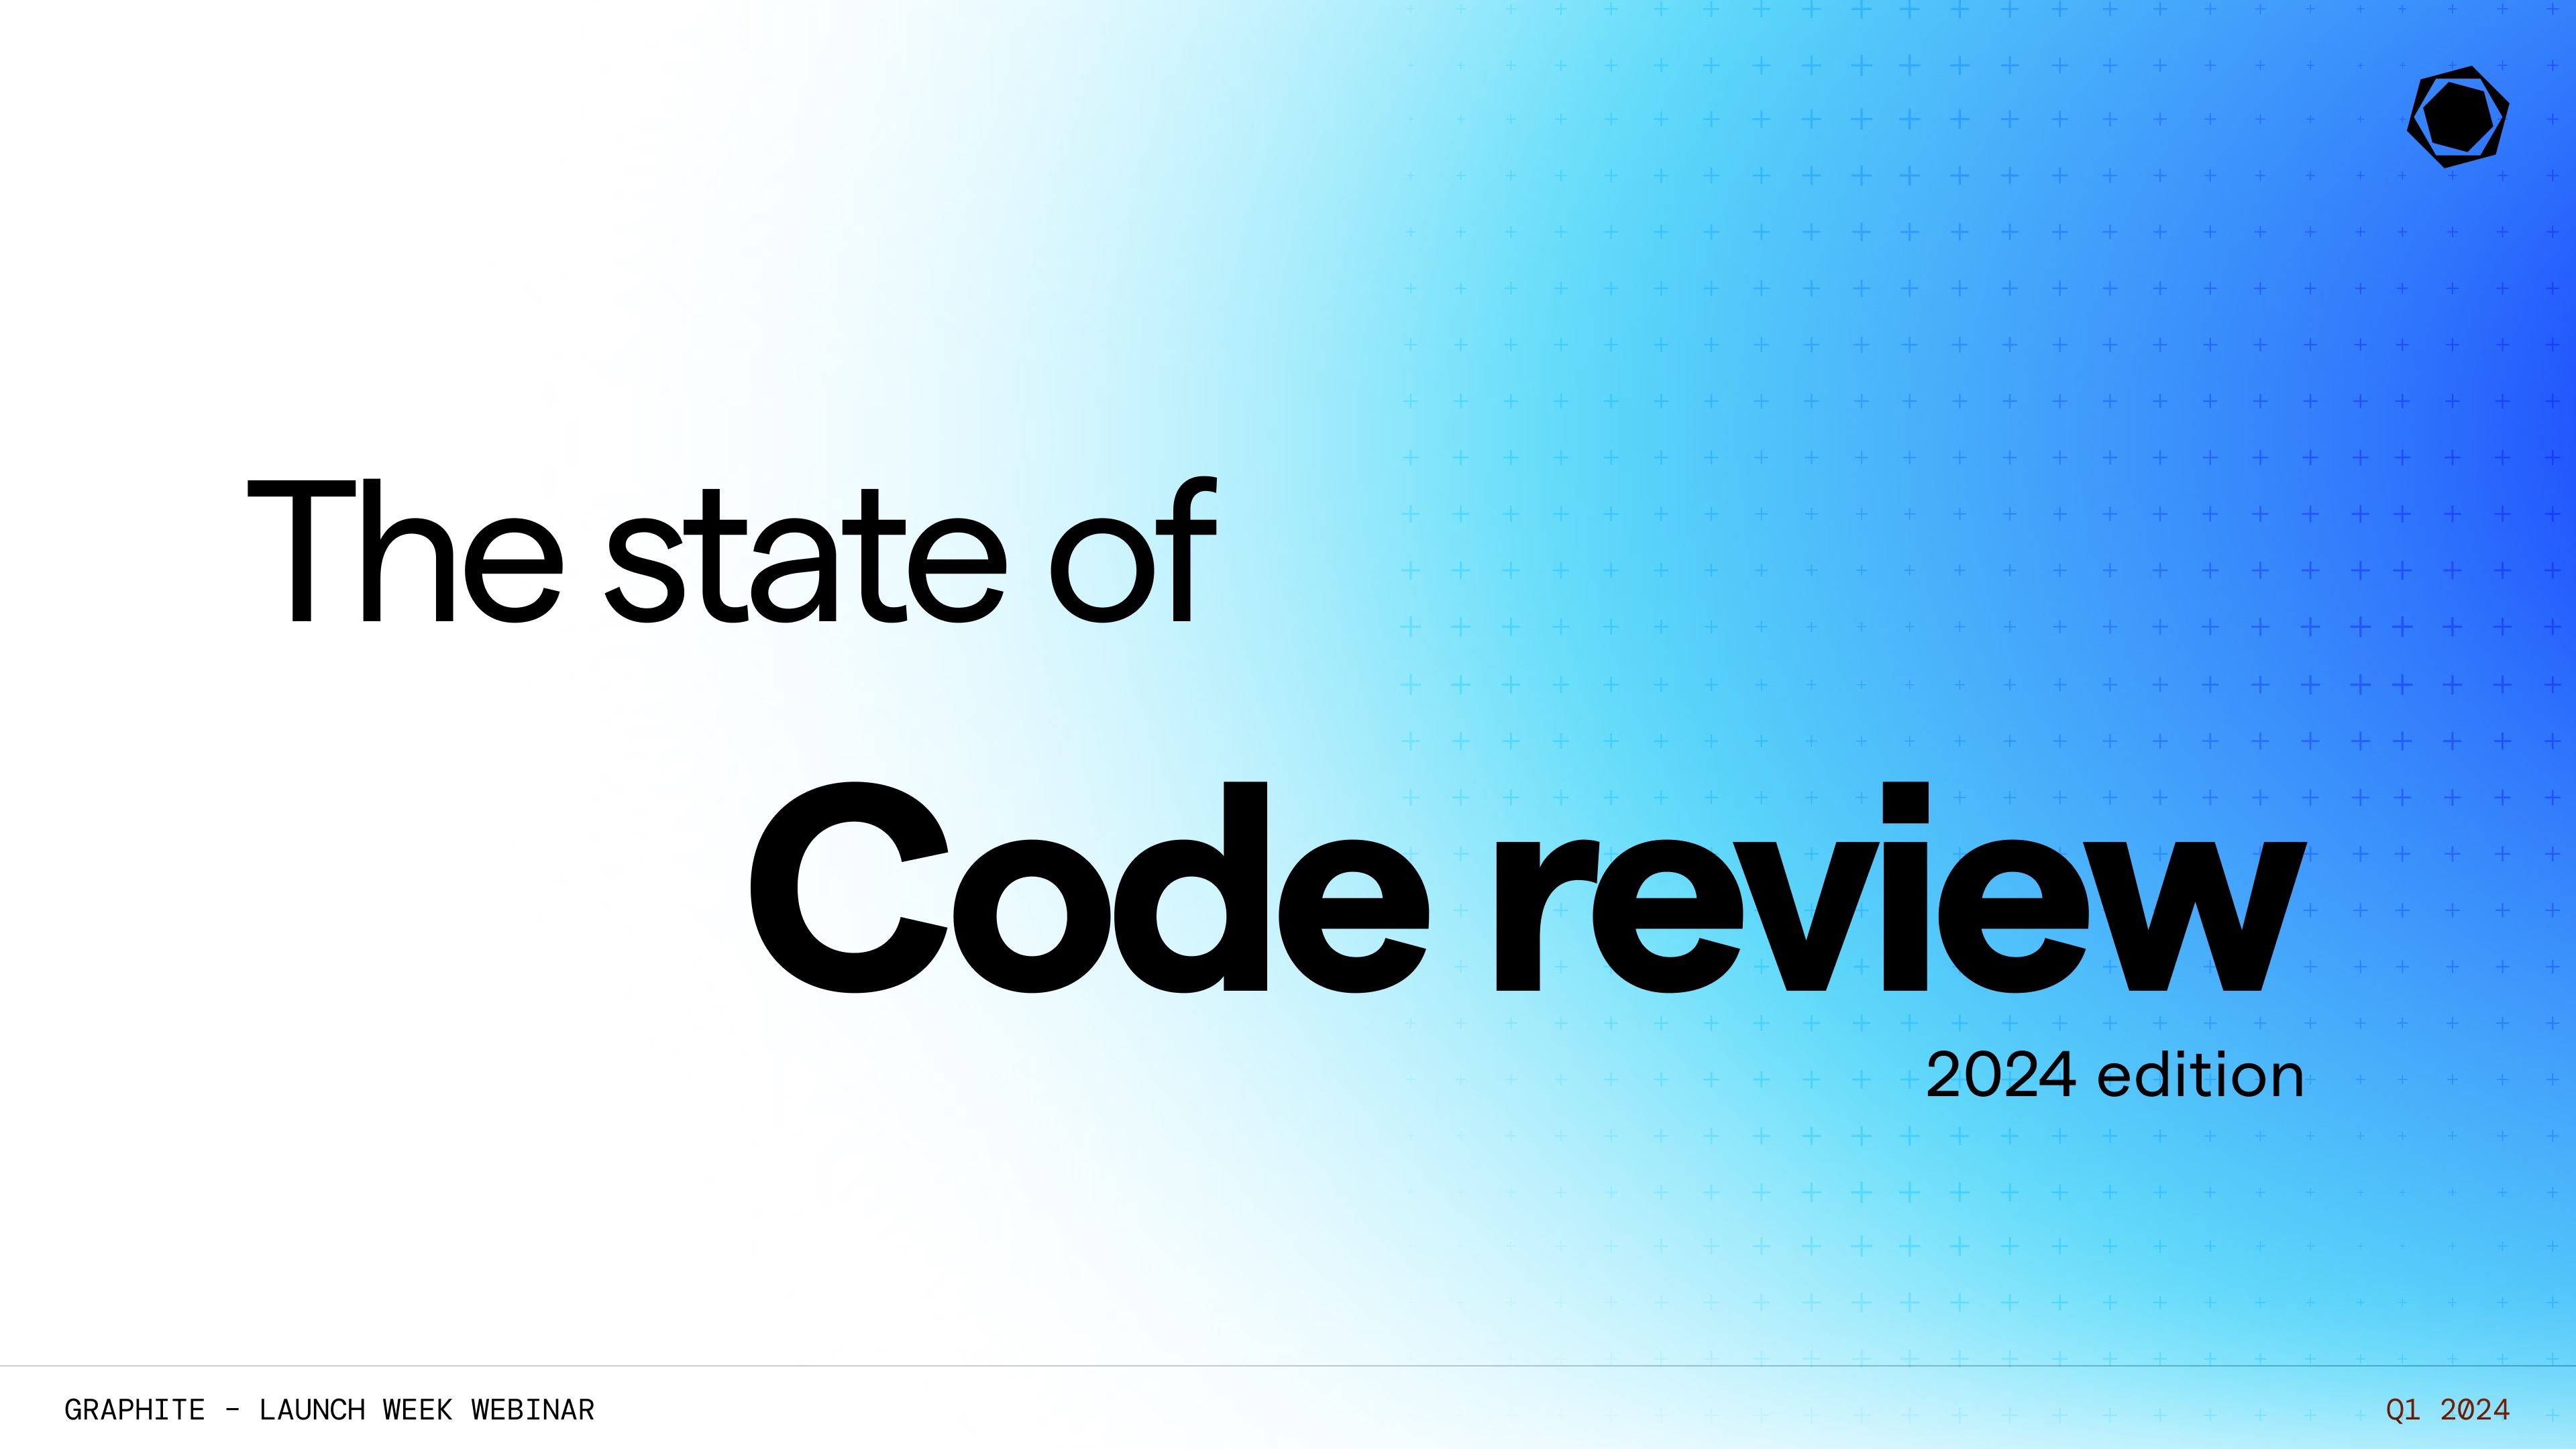 state of code review 2024 teaser